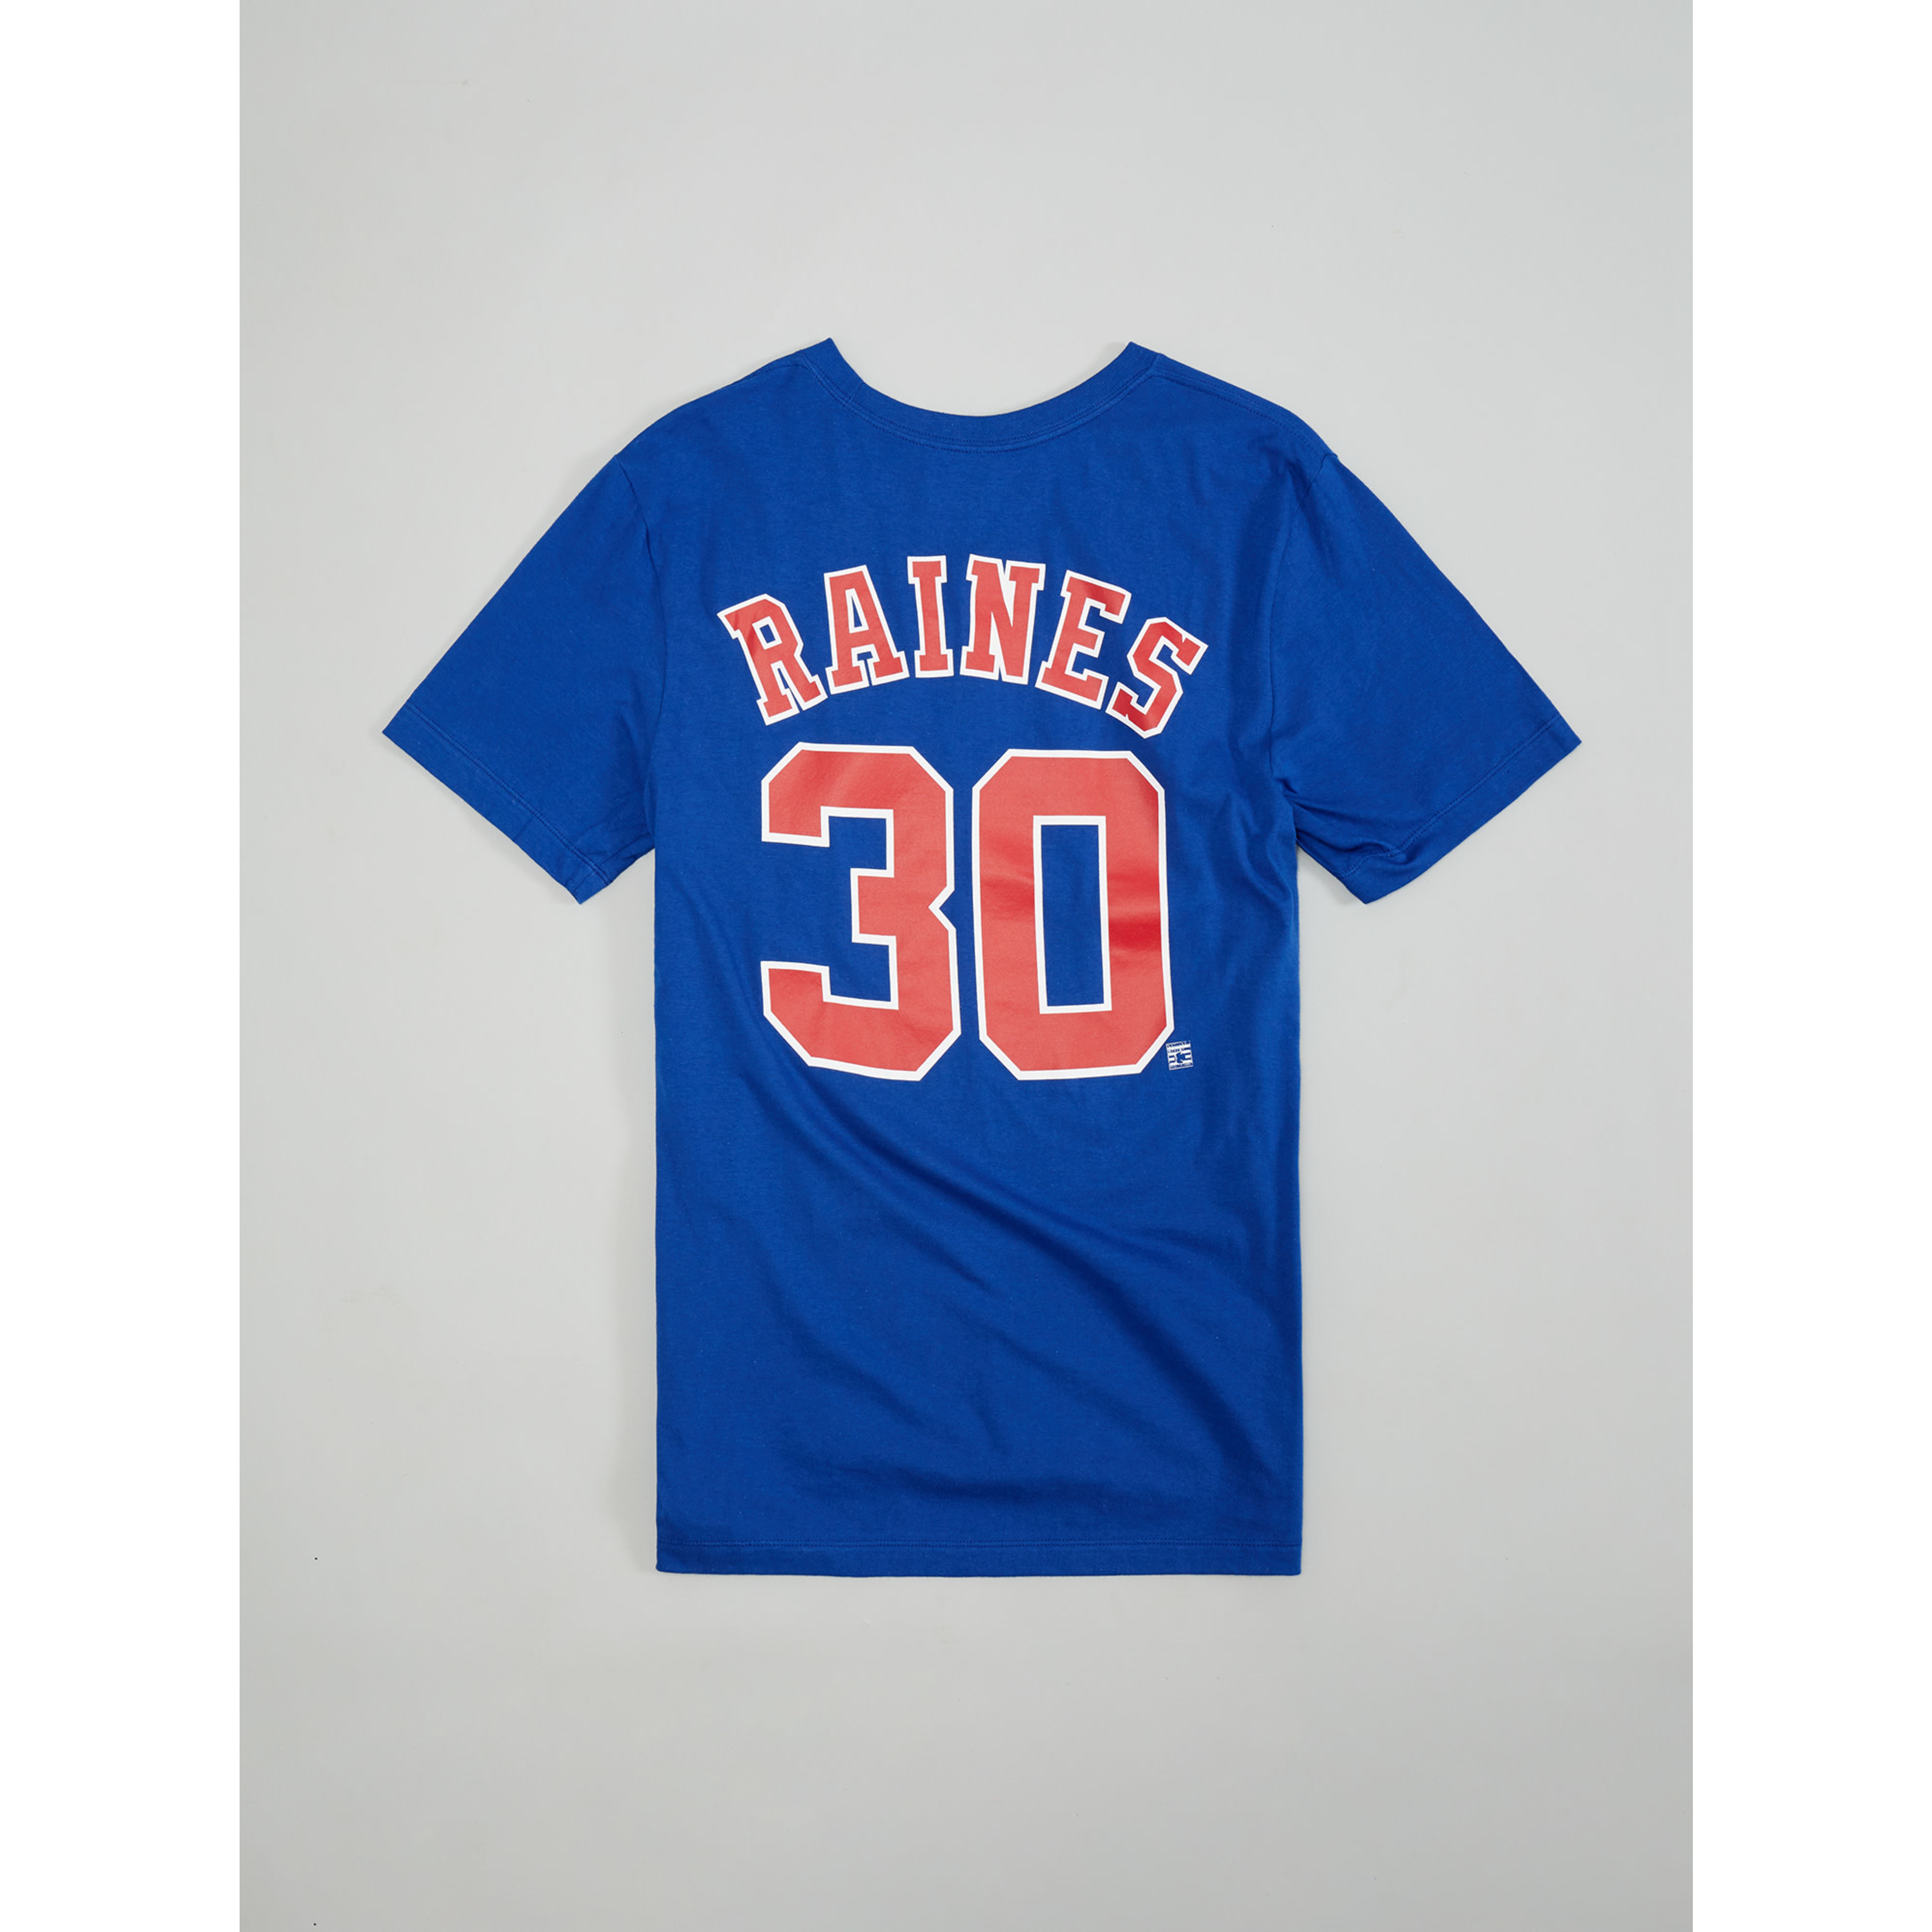 THJE0008 T-SHIRT JOUEUR EXPOS 30 RAINES - Tricolore Sports